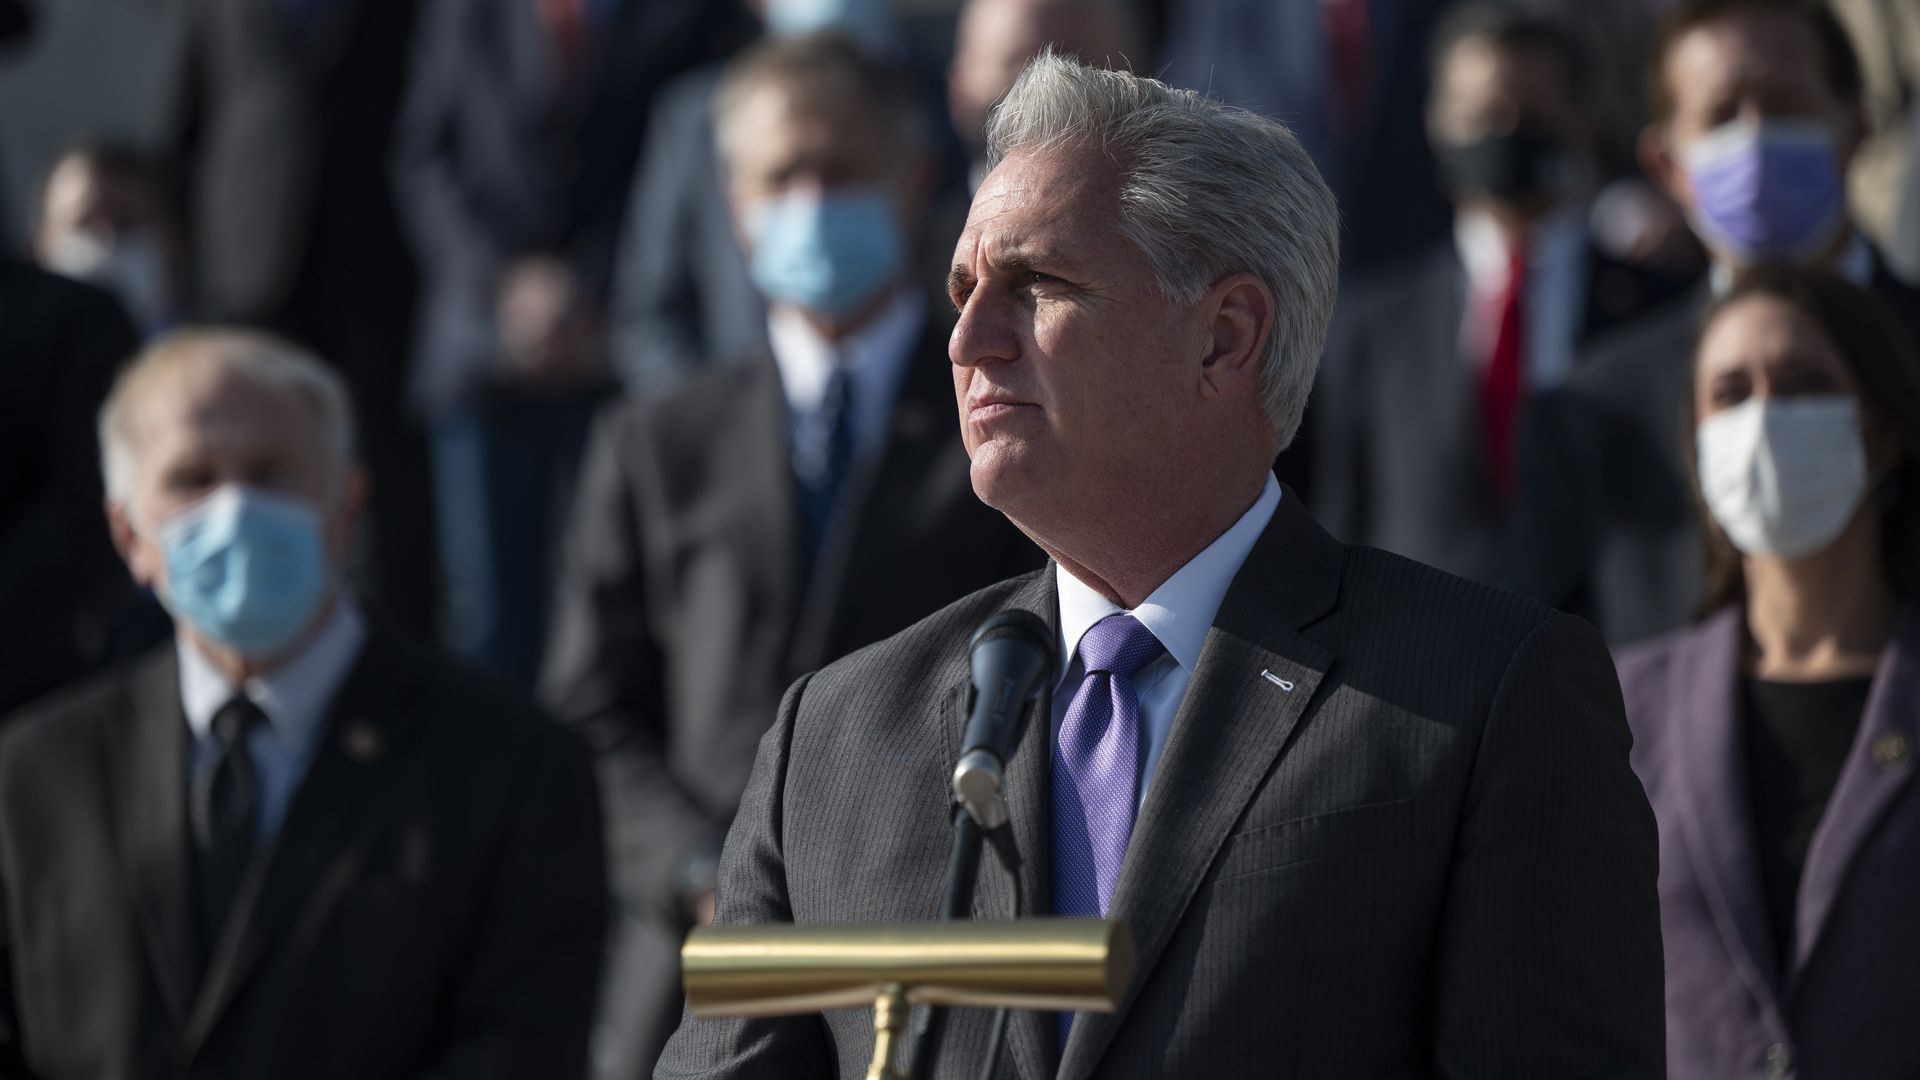 House Minority Leader Kevin McCarthy looks on during a news conference outside the U.S. Capitol.